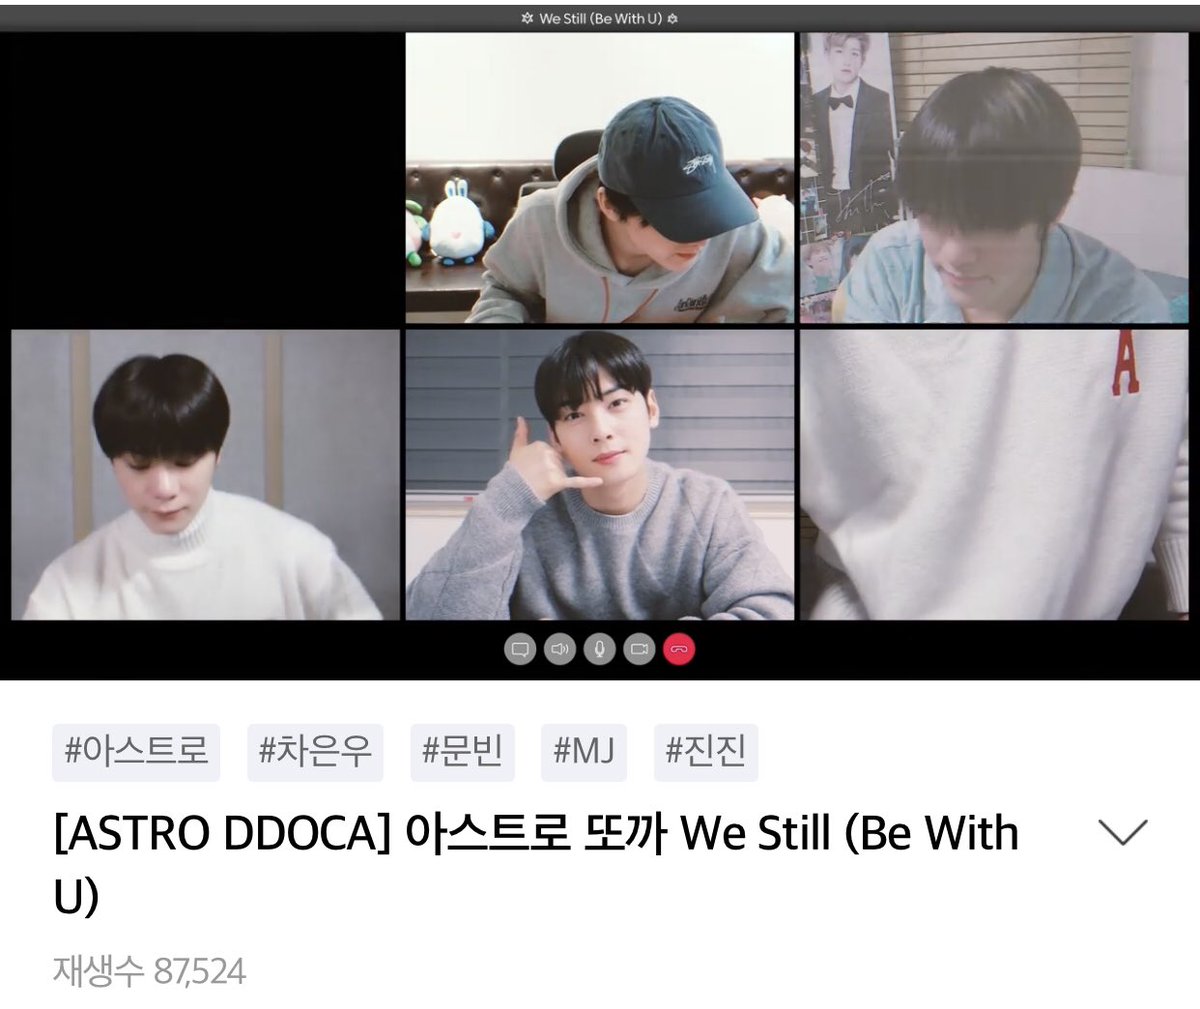 [📈] 210101 12:15 AM KST ‘We Still (Be With U)’ DDOCA Official Channel: 67,211 views (🔺4,001) 🔗youtu.be/zyk2KpV6avk Naver TV: 87,524 views (🔺8,552) 🔗naver.me/FVPwMoN9 [ #아스트로 #ASTRO_BeWithU @offclASTRO ]